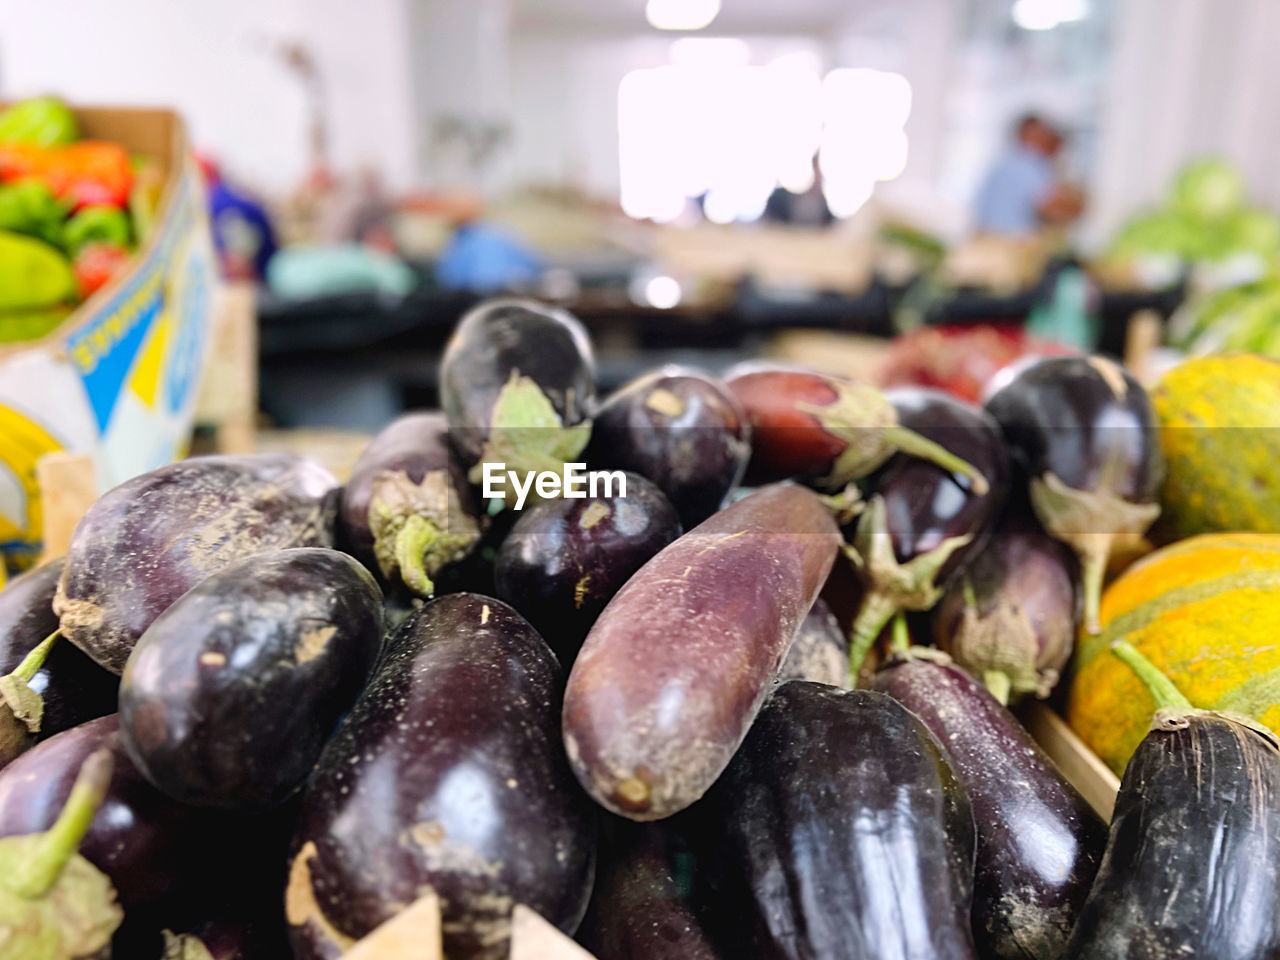 food, food and drink, healthy eating, mussel, freshness, wellbeing, vegetable, eggplant, produce, market, fruit, focus on foreground, abundance, no people, business finance and industry, business, retail, large group of objects, indoors, close-up, organic, market stall, plant